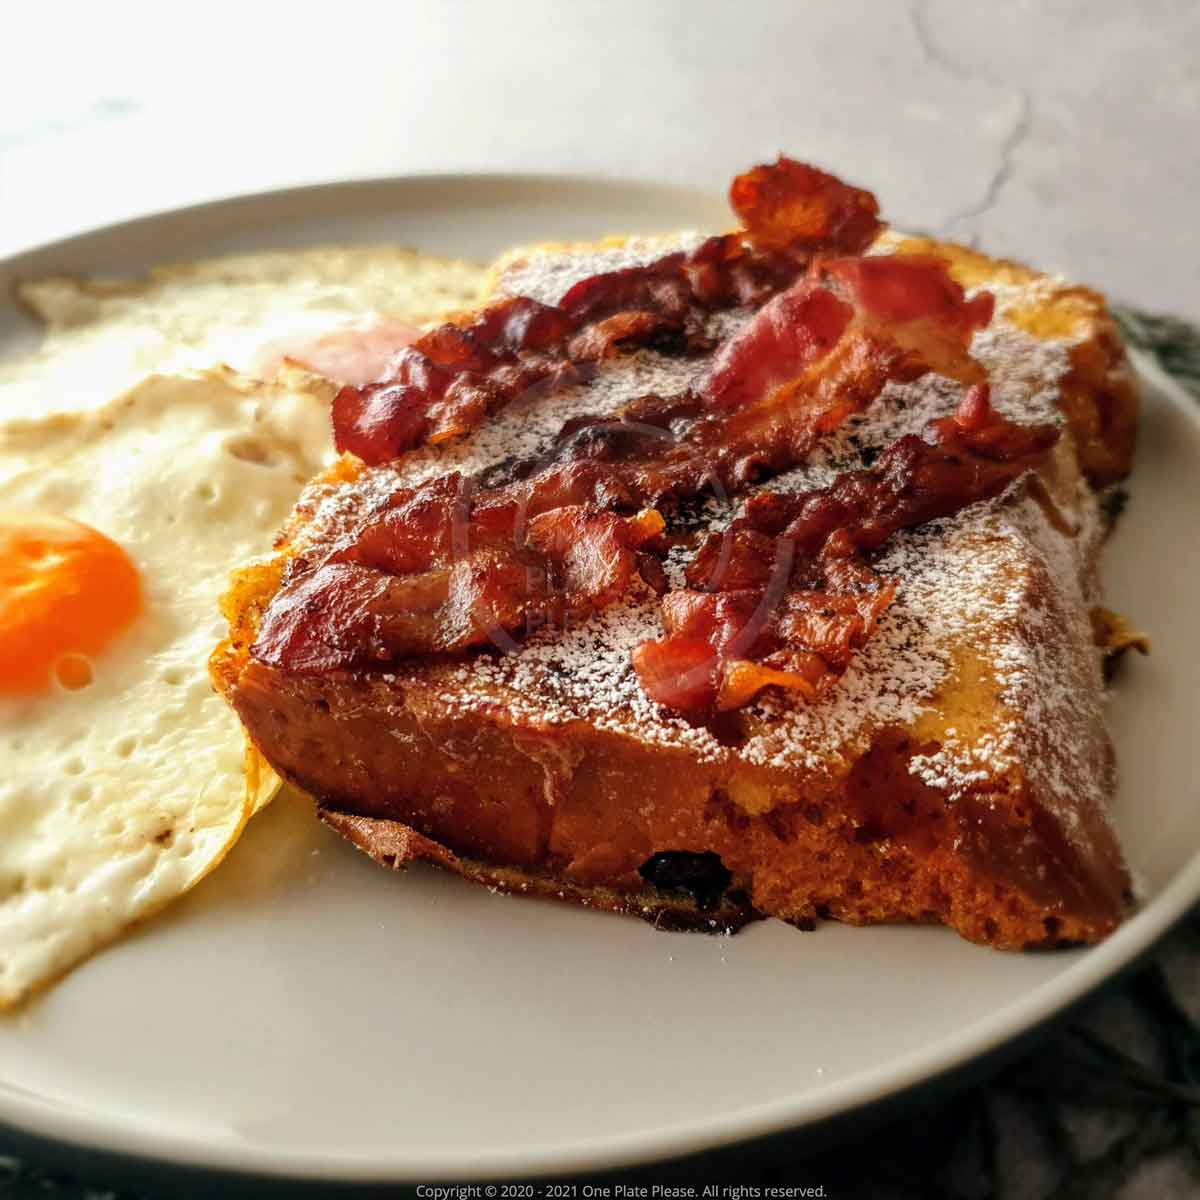 french toast and bacon breakfast